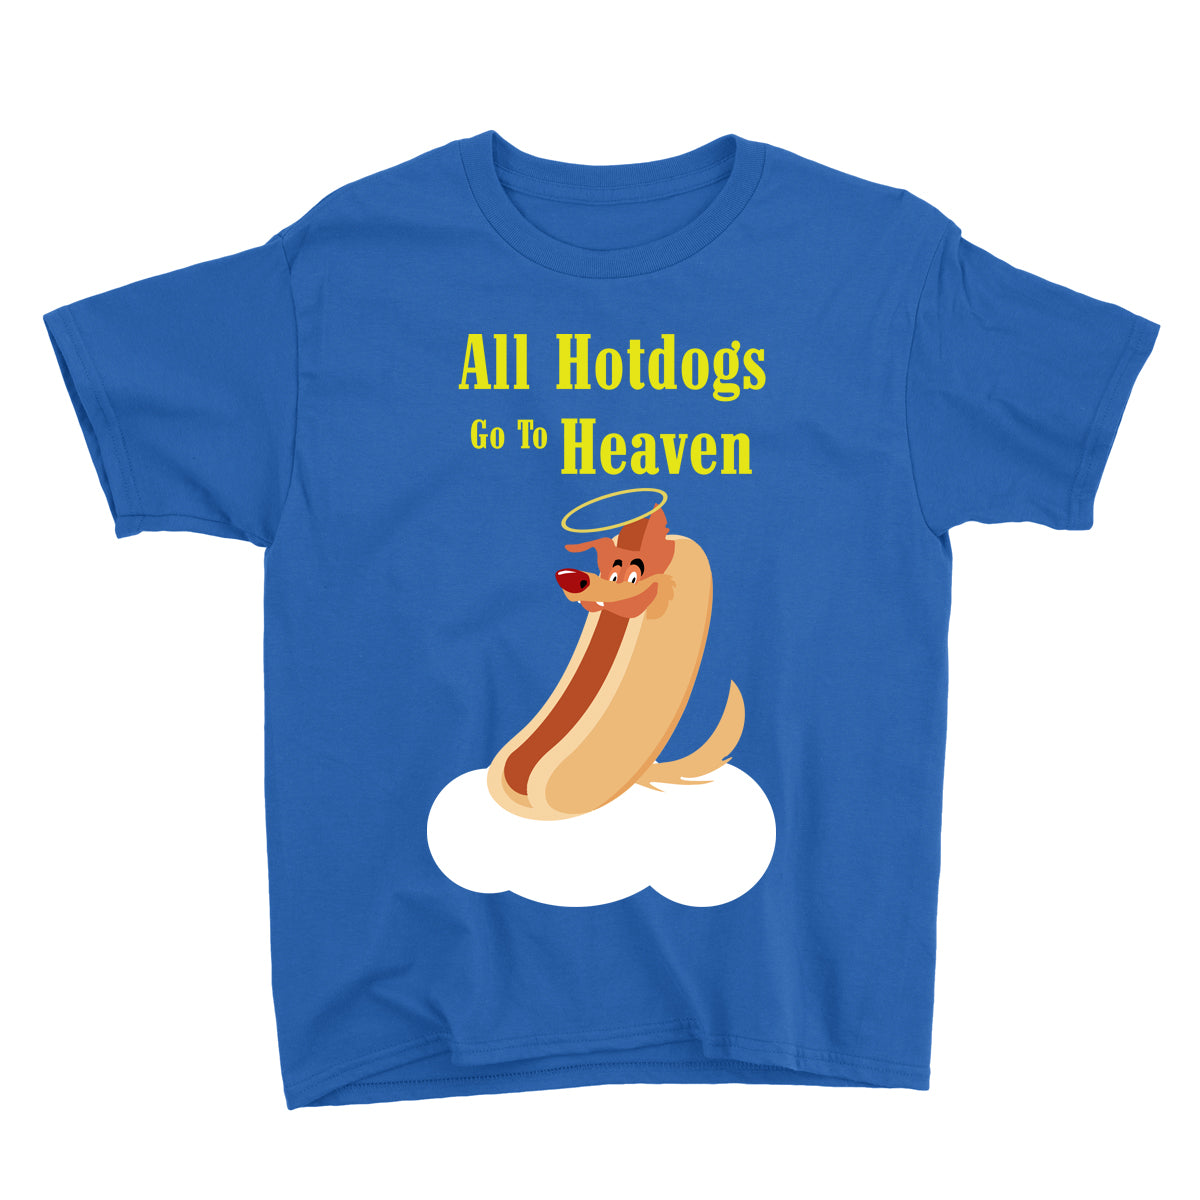 Movie The Food - All Hotdogs Go To Heaven Kid's T-Shirt - Royal Blue